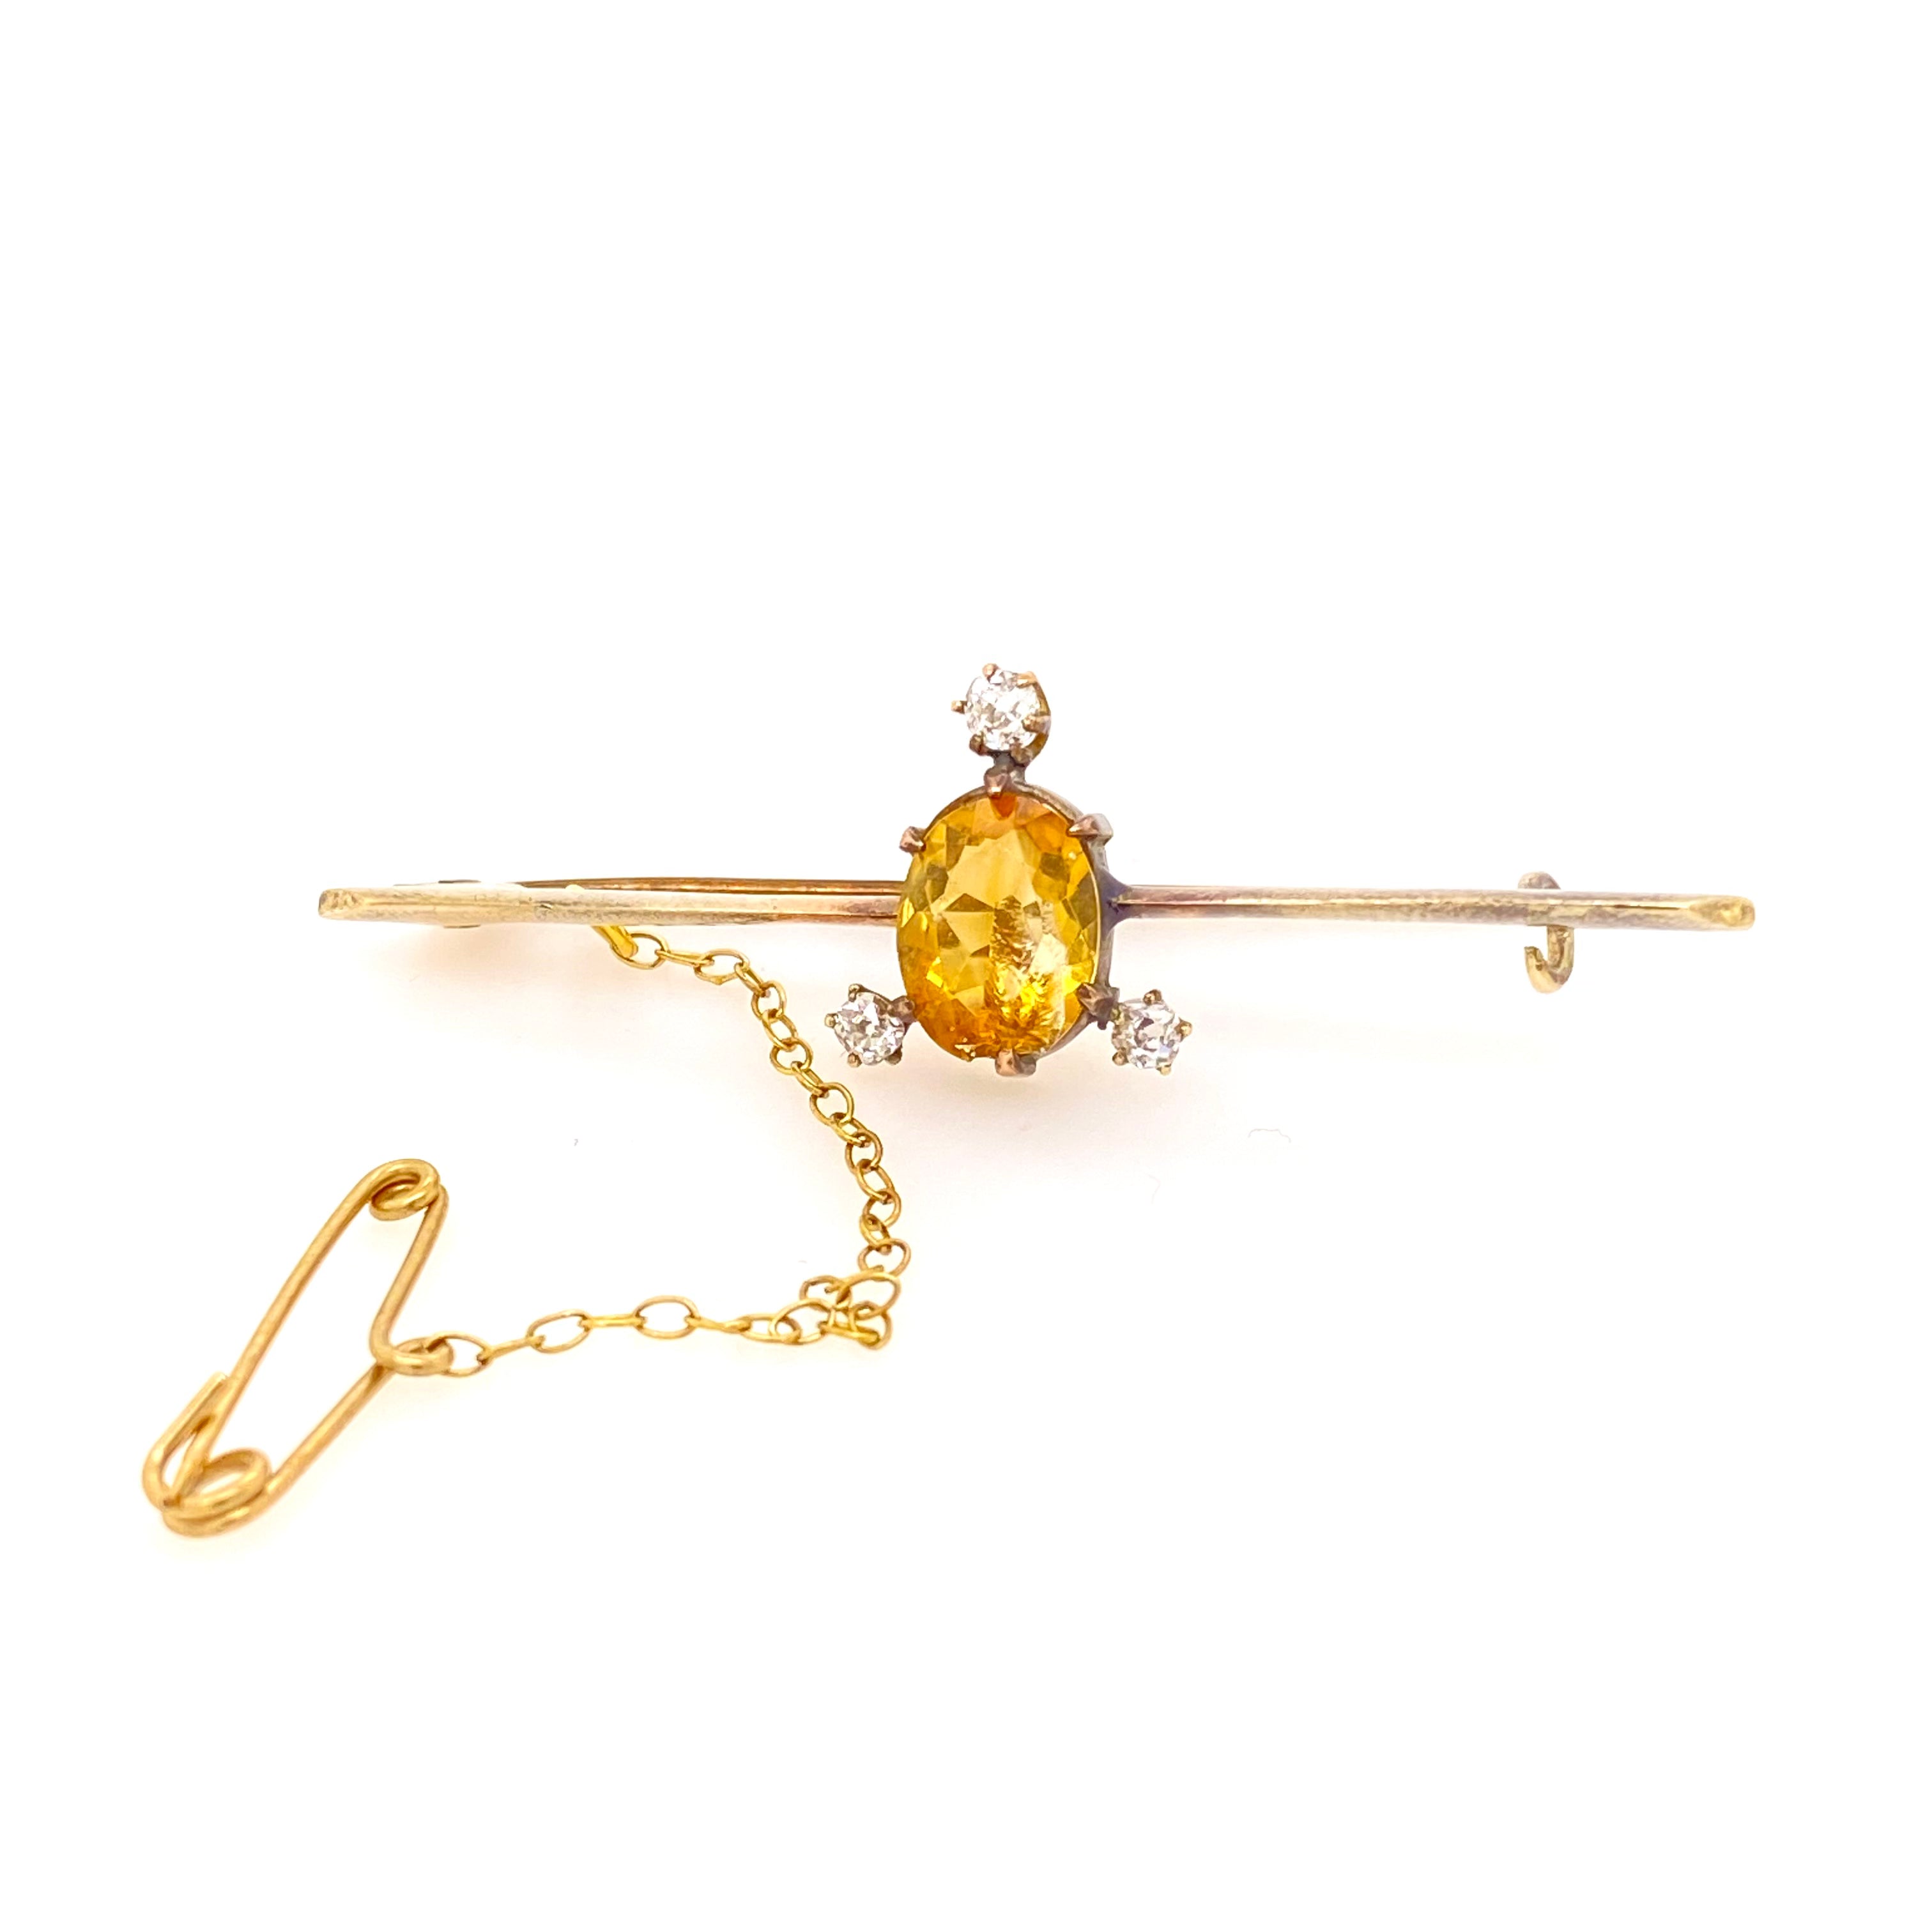 Antique 9ct yellow gold Citrine and diamond brooch